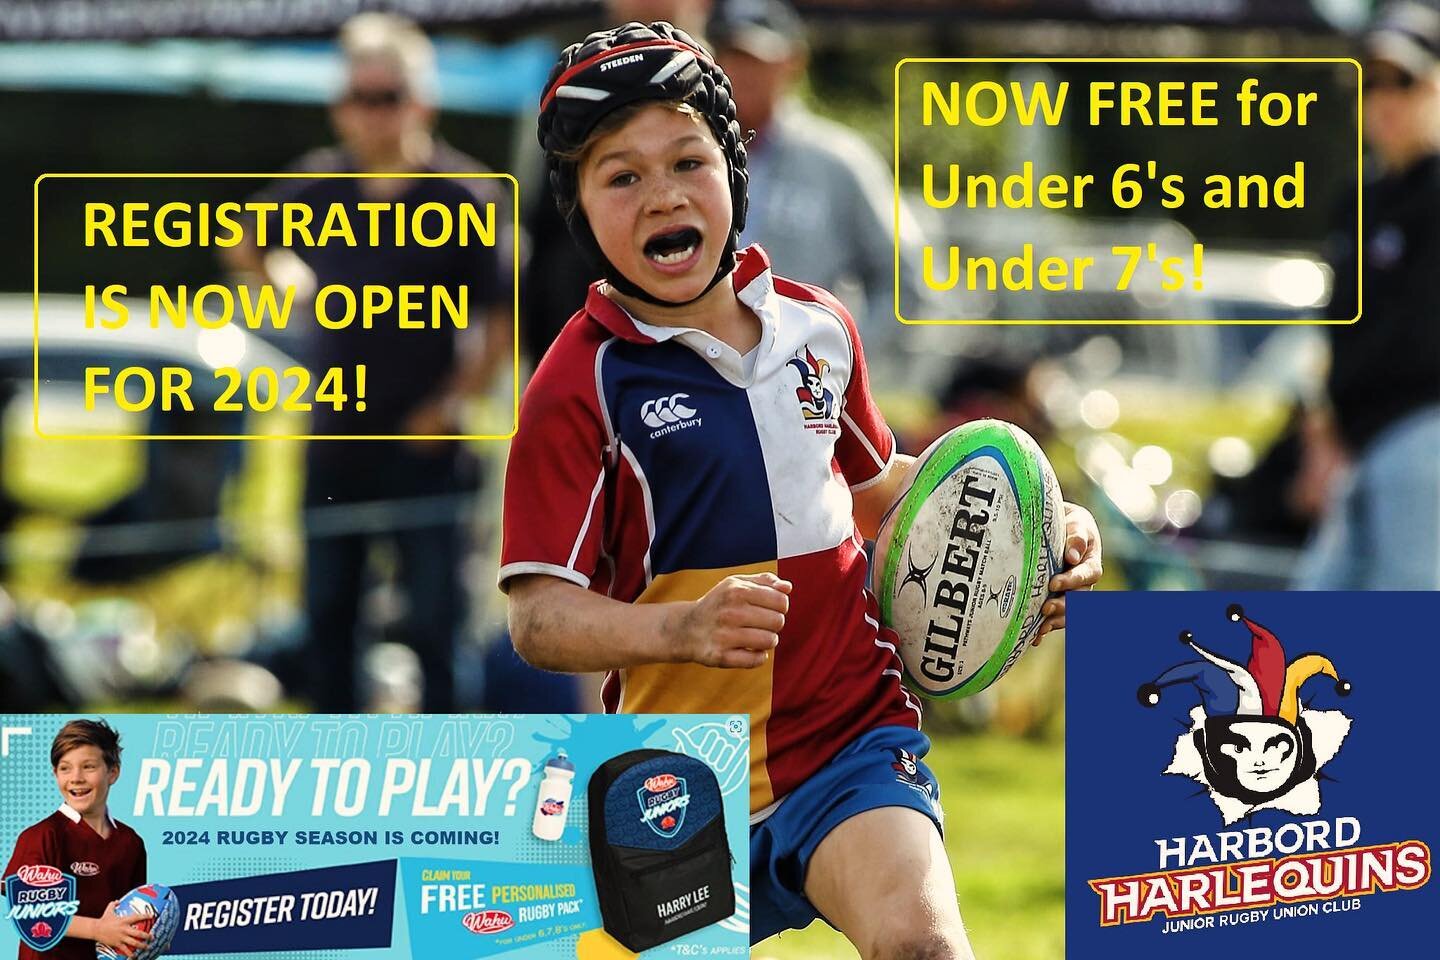 2024 Registrations Now Open!

Big news, we&rsquo;re pleased to announce that the U6&rsquo;s and U7&rsquo;s will be FREE to register this year!

Also, our friends @wearewahu will again be supplying ALL U6, U7 and U8 Players, a FREE personalized WAHU @